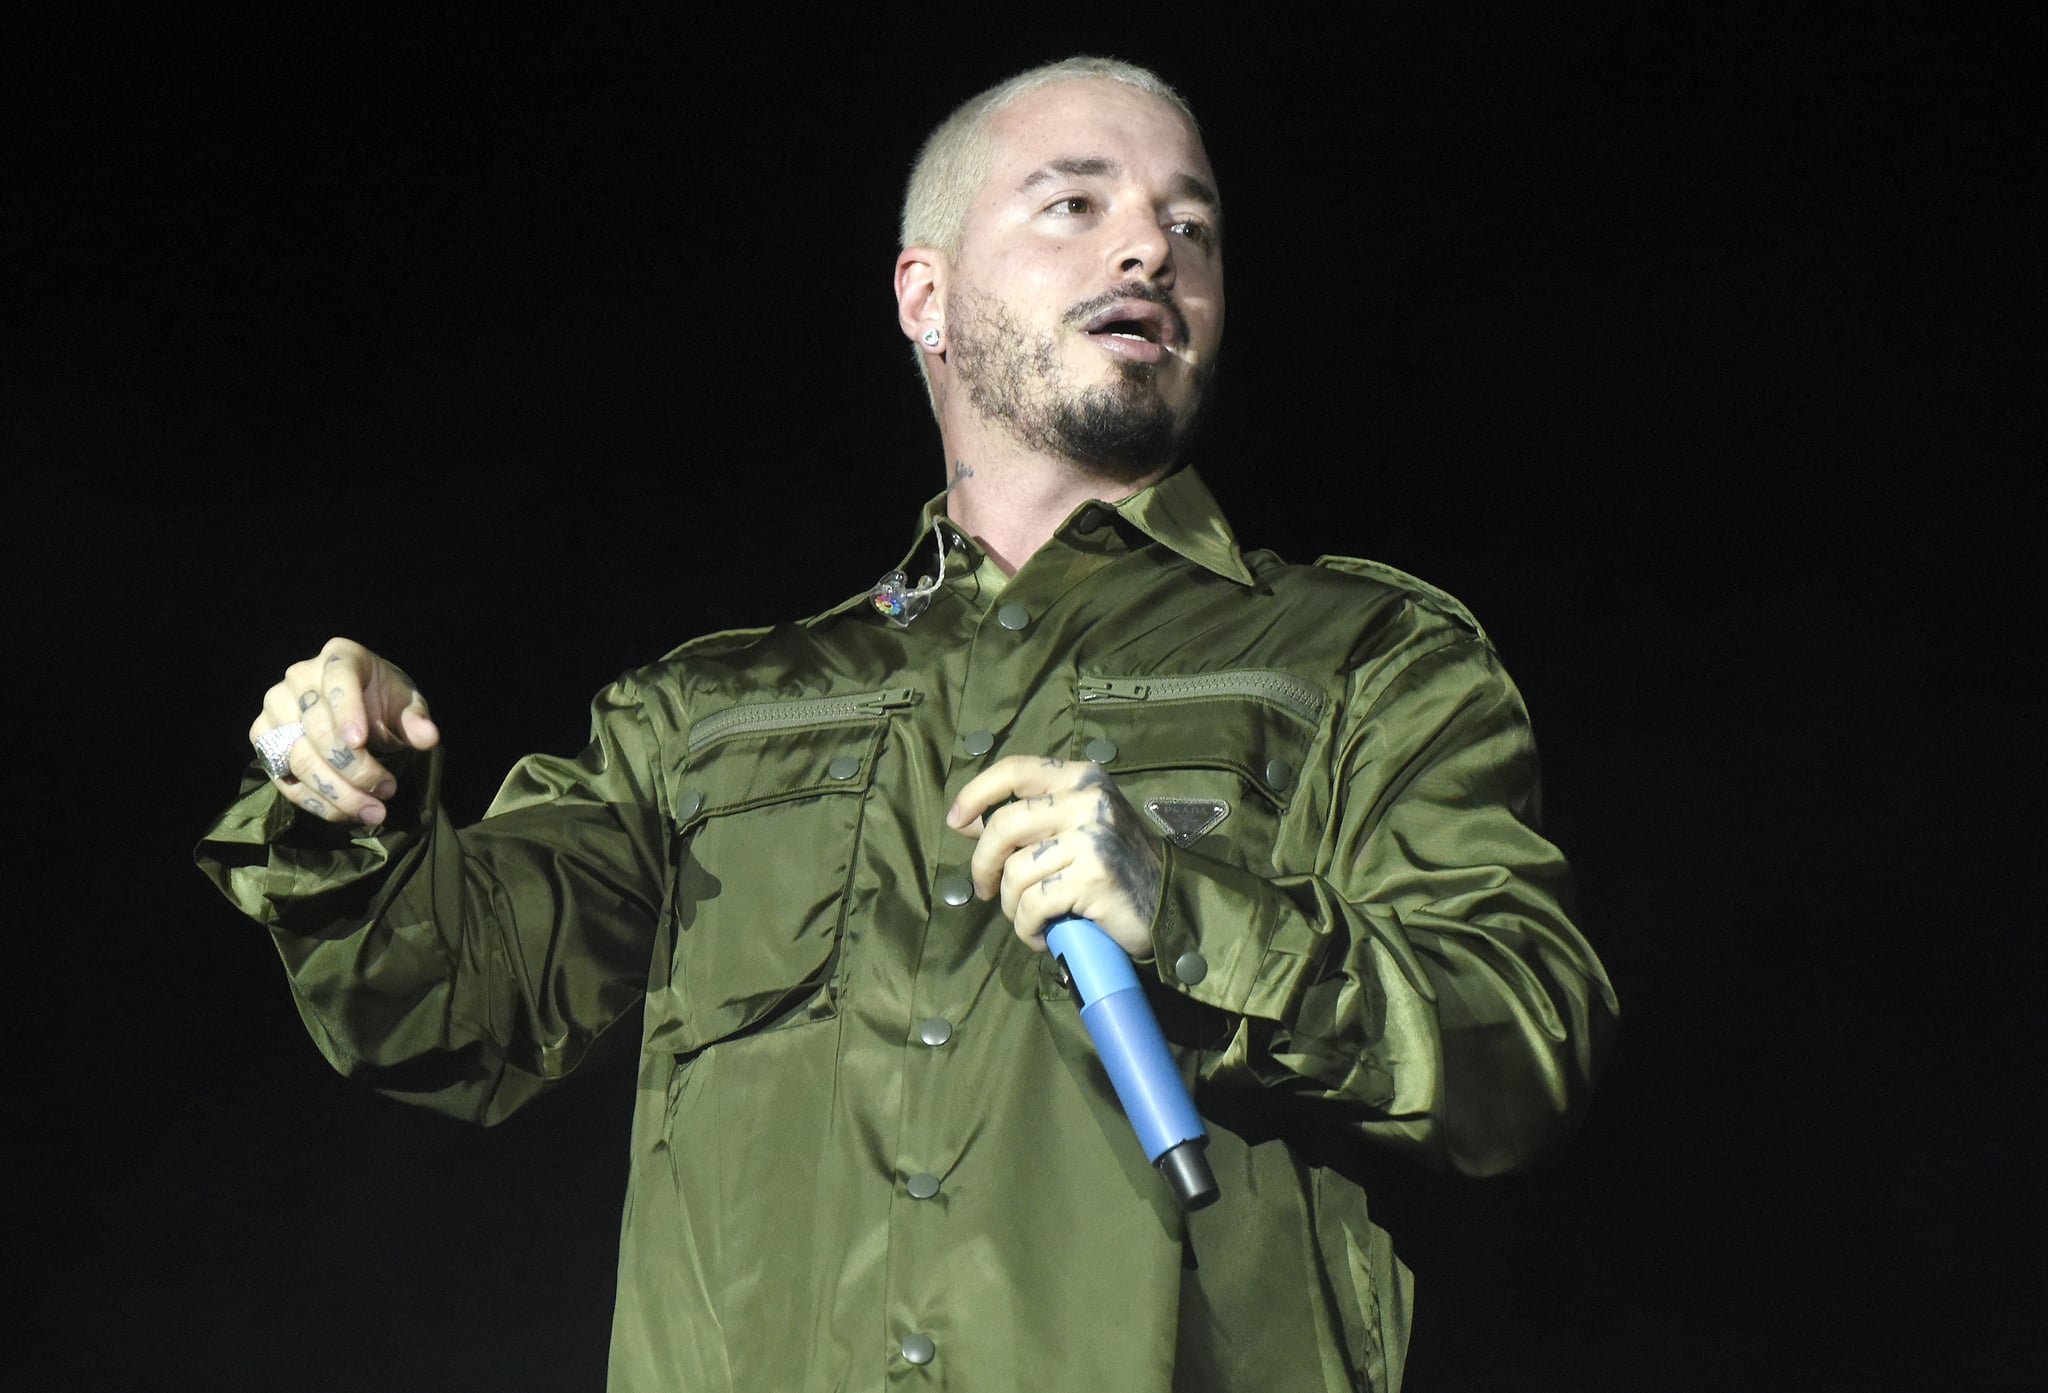 SAN FRANCISCO, CALIFORNIA - OCTOBER 31: J Balvin performs during the 2021 Outside Lands Music and Arts festival at Golden Gate Park on October 31, 2021 in San Francisco, California. (Photo by Tim Mosenfelder/Getty Images)